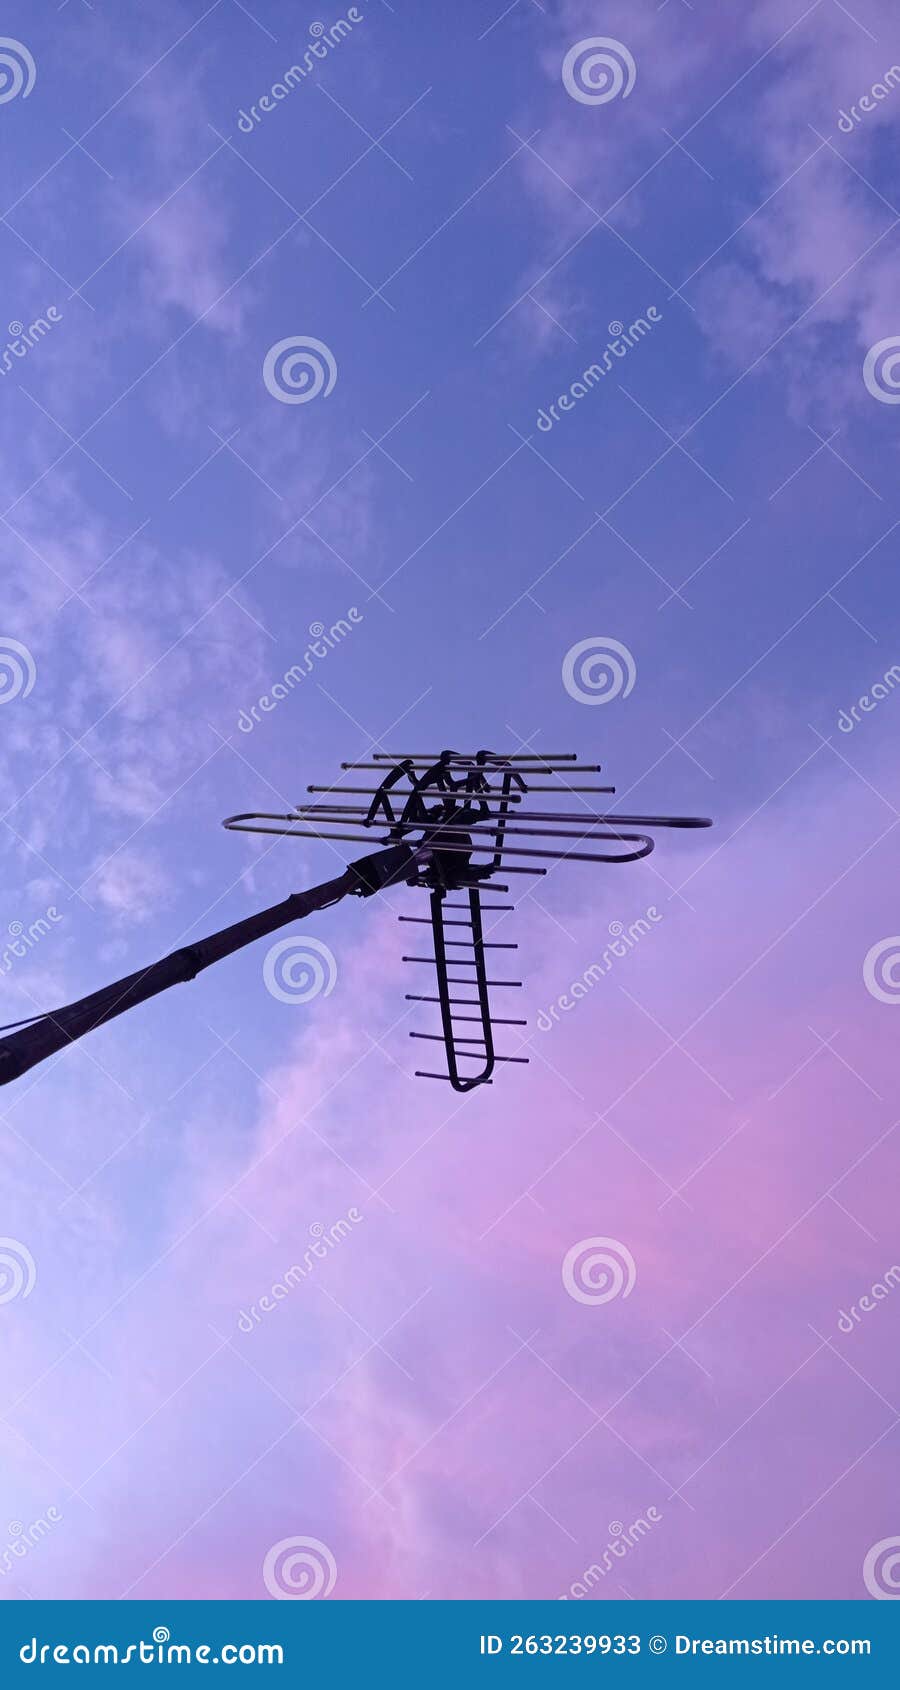 an simple television antenne with aesthetic sky